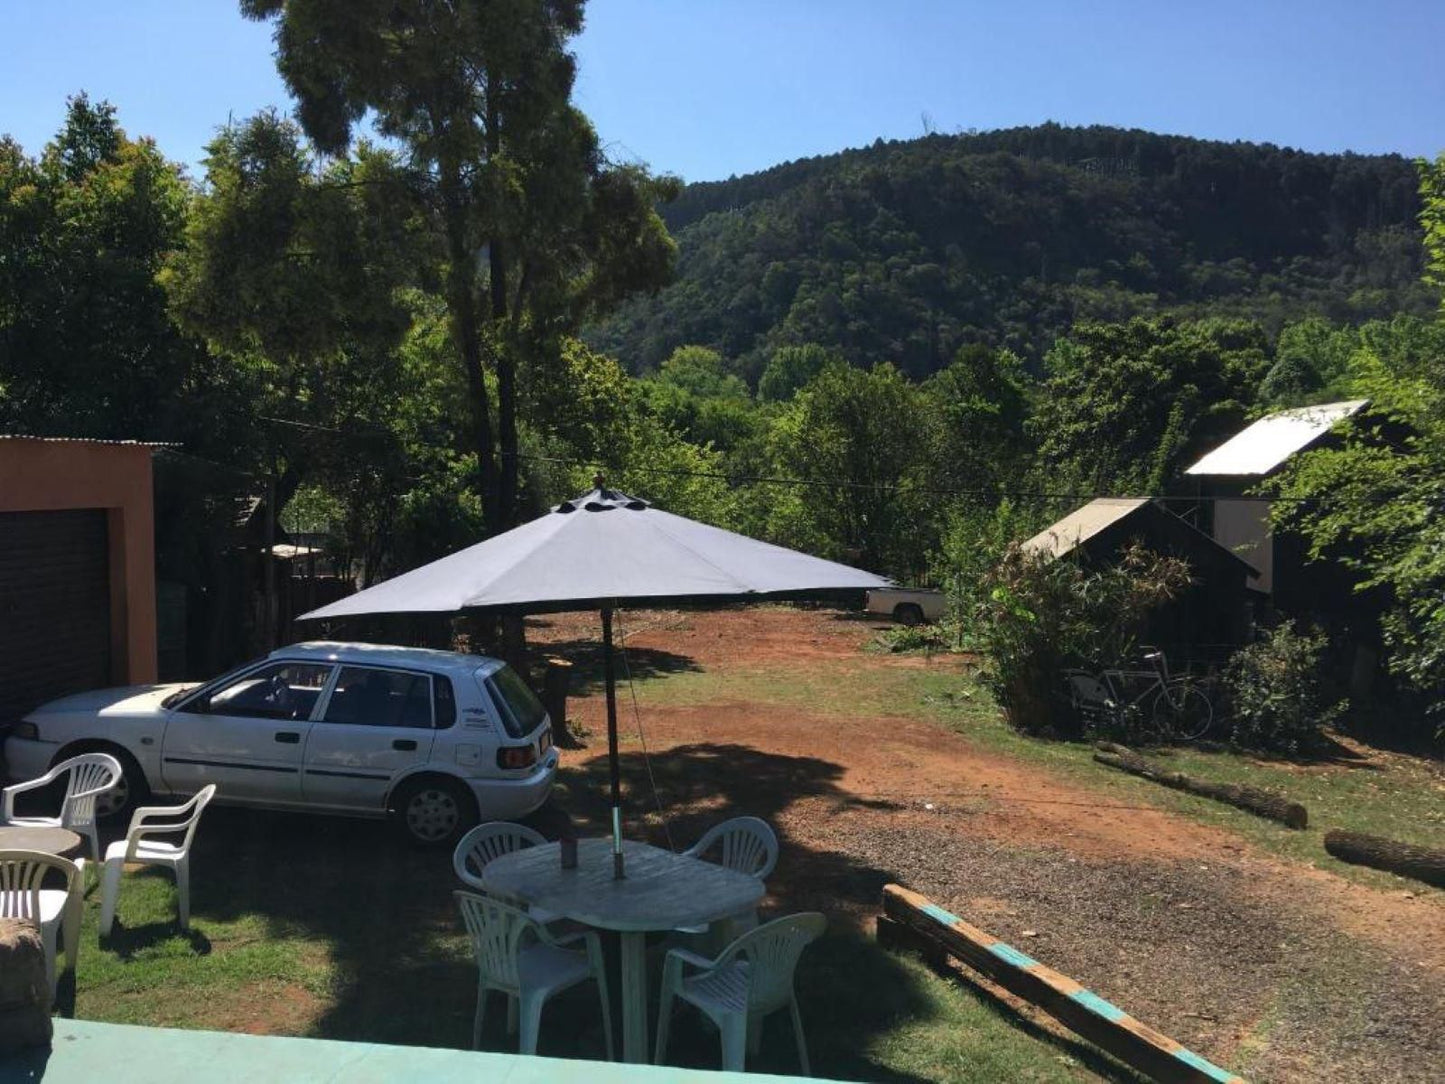 Sabie Gypsys Backpackers Sabie Mpumalanga South Africa Tent, Architecture, Car, Vehicle